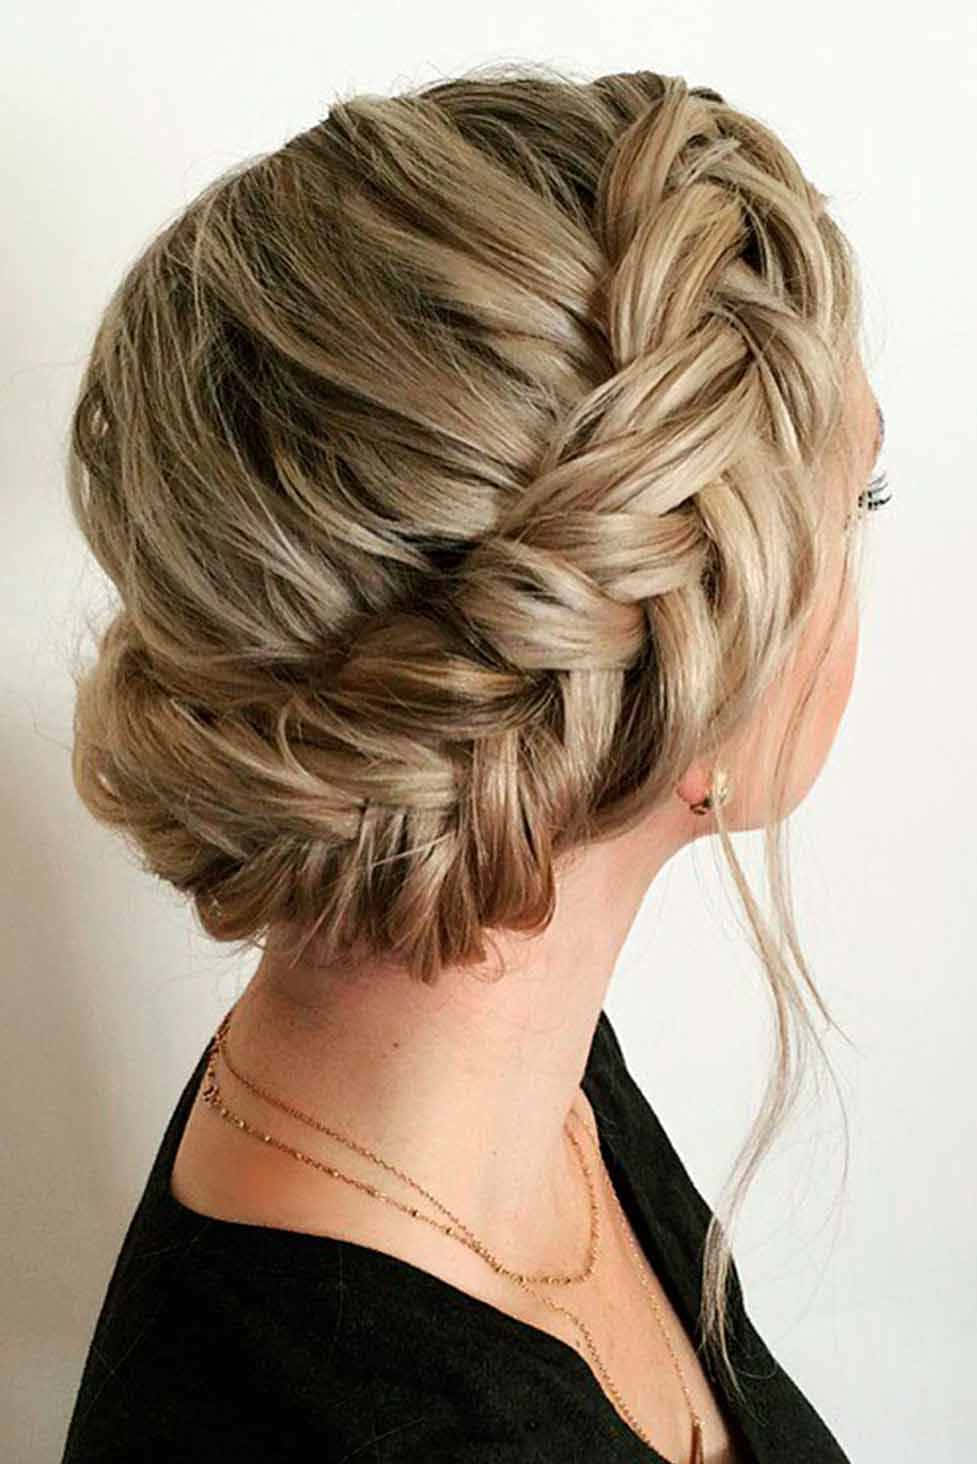 Show off your personal style with this cute and easy hairstyle!